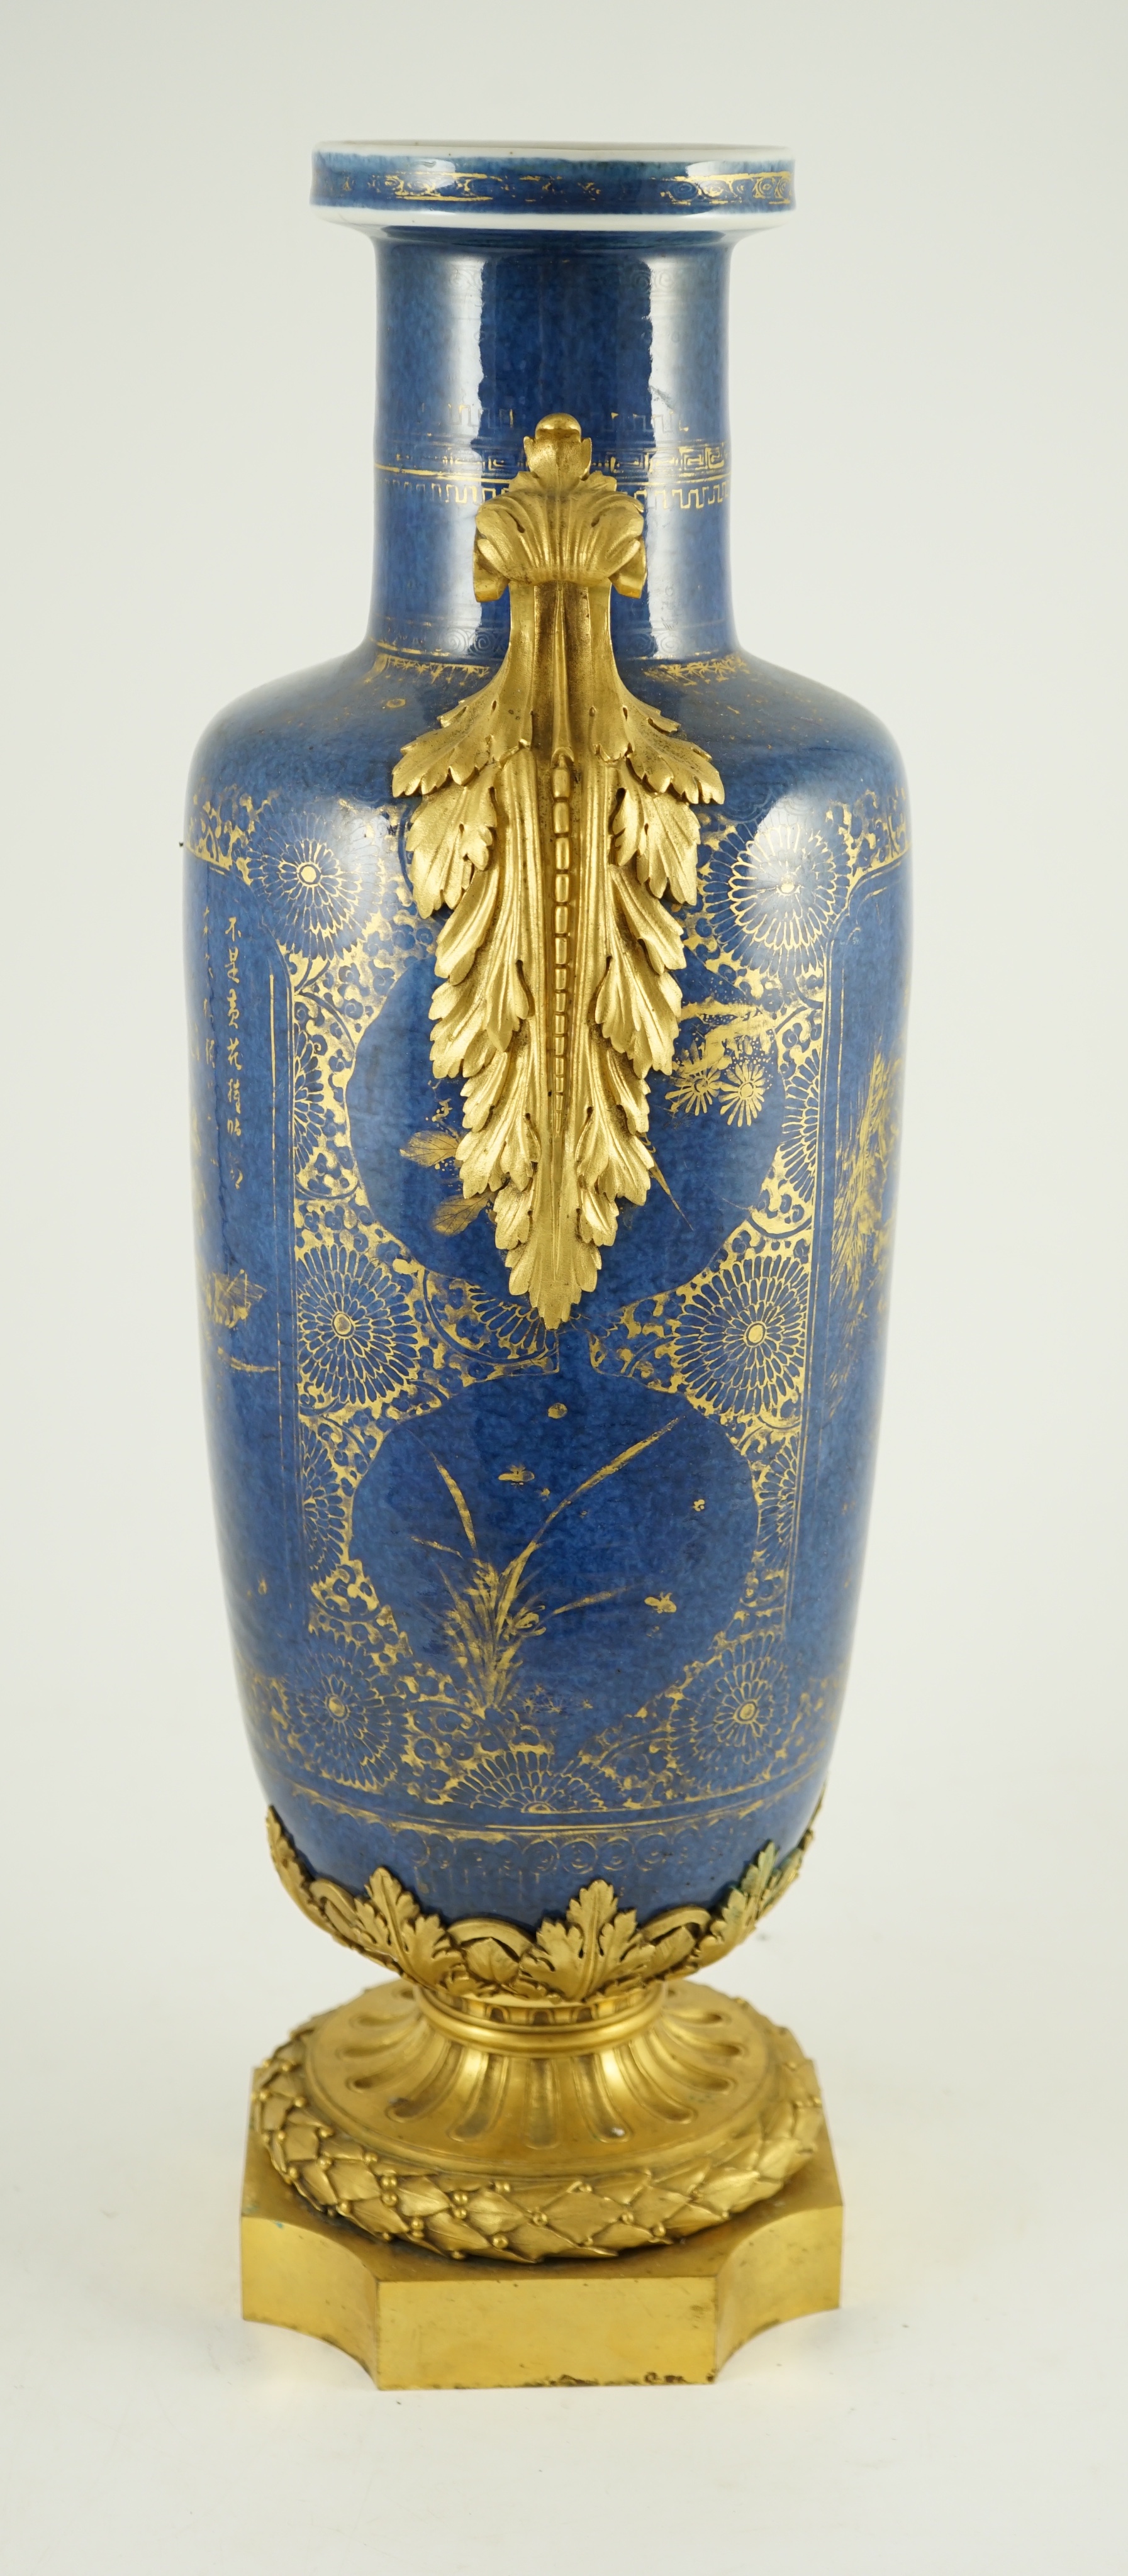 A Chinese gilt-decorated powder blue rouleau vase, Kangxi period, with French ormolu mounts, 55 cm high including ormolu mounts